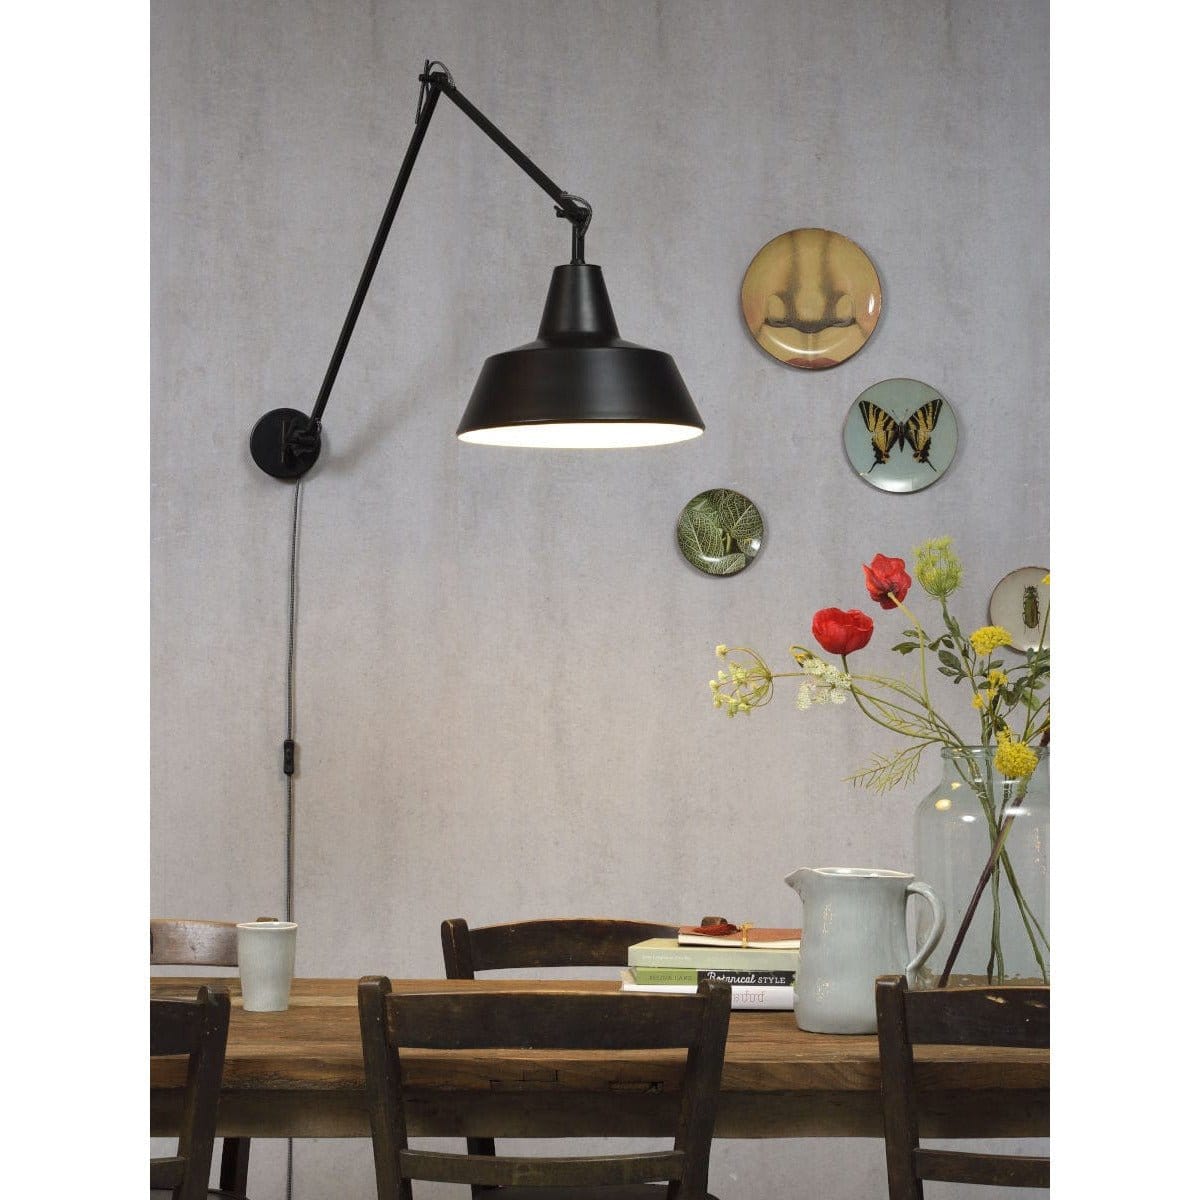 It's About RoMi Wall Lights Black Chicago Wall Light, black, grey green or white